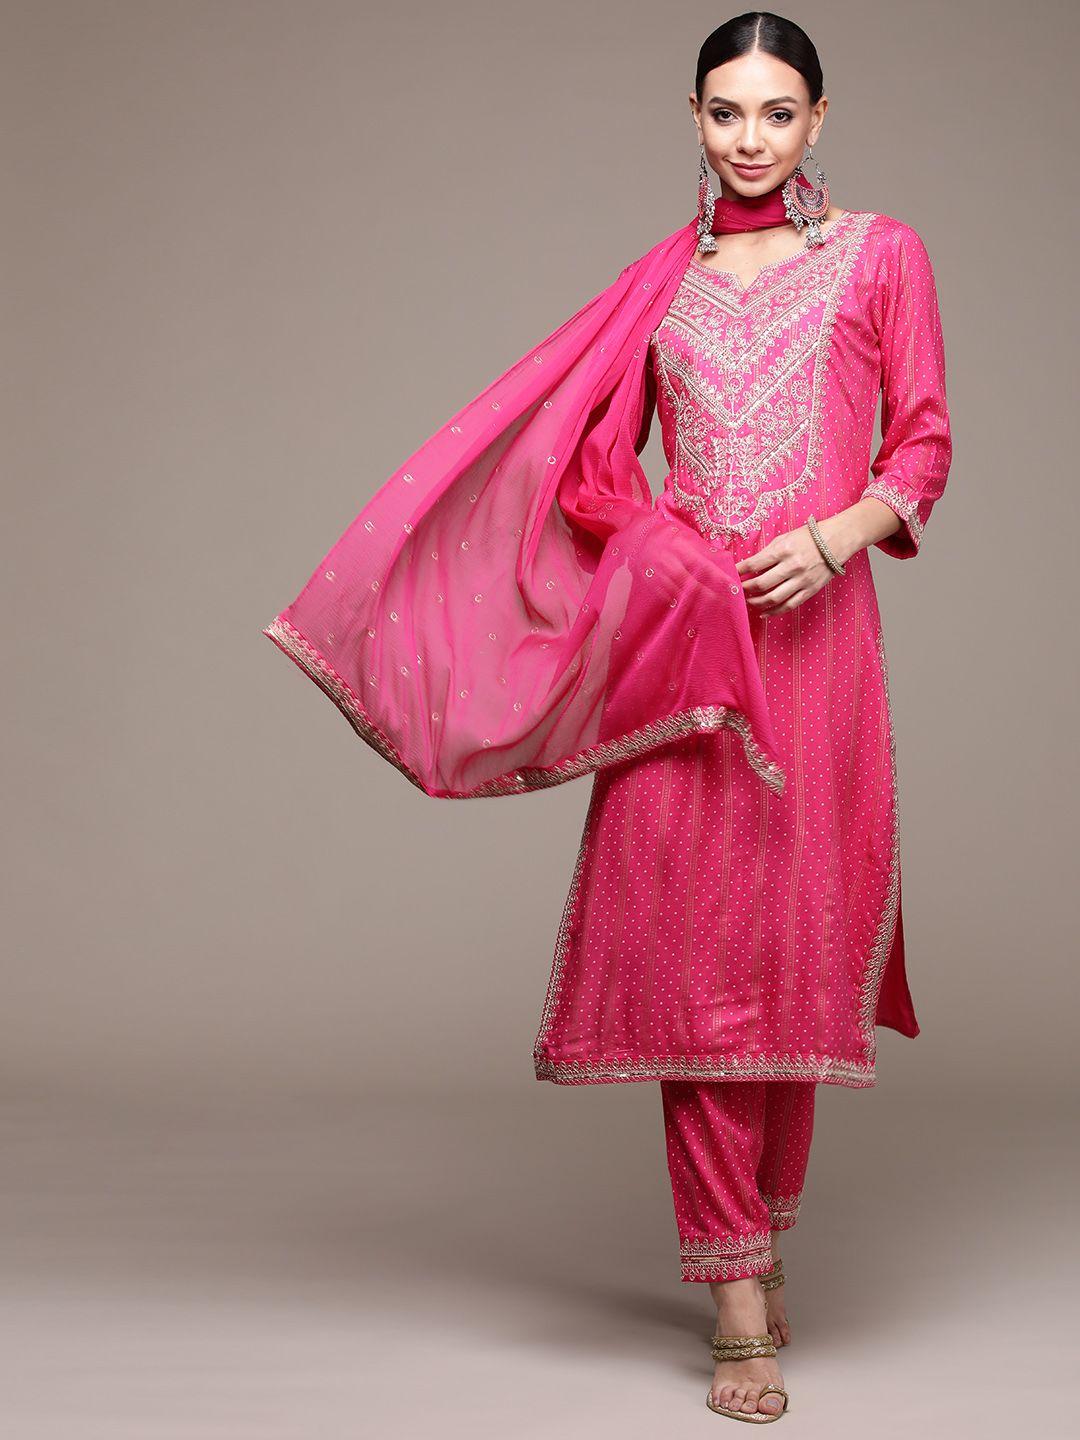 anubhutee-women-pink-ethnic-motifs-embroidered-kurta-with-trousers-&-with-dupatta